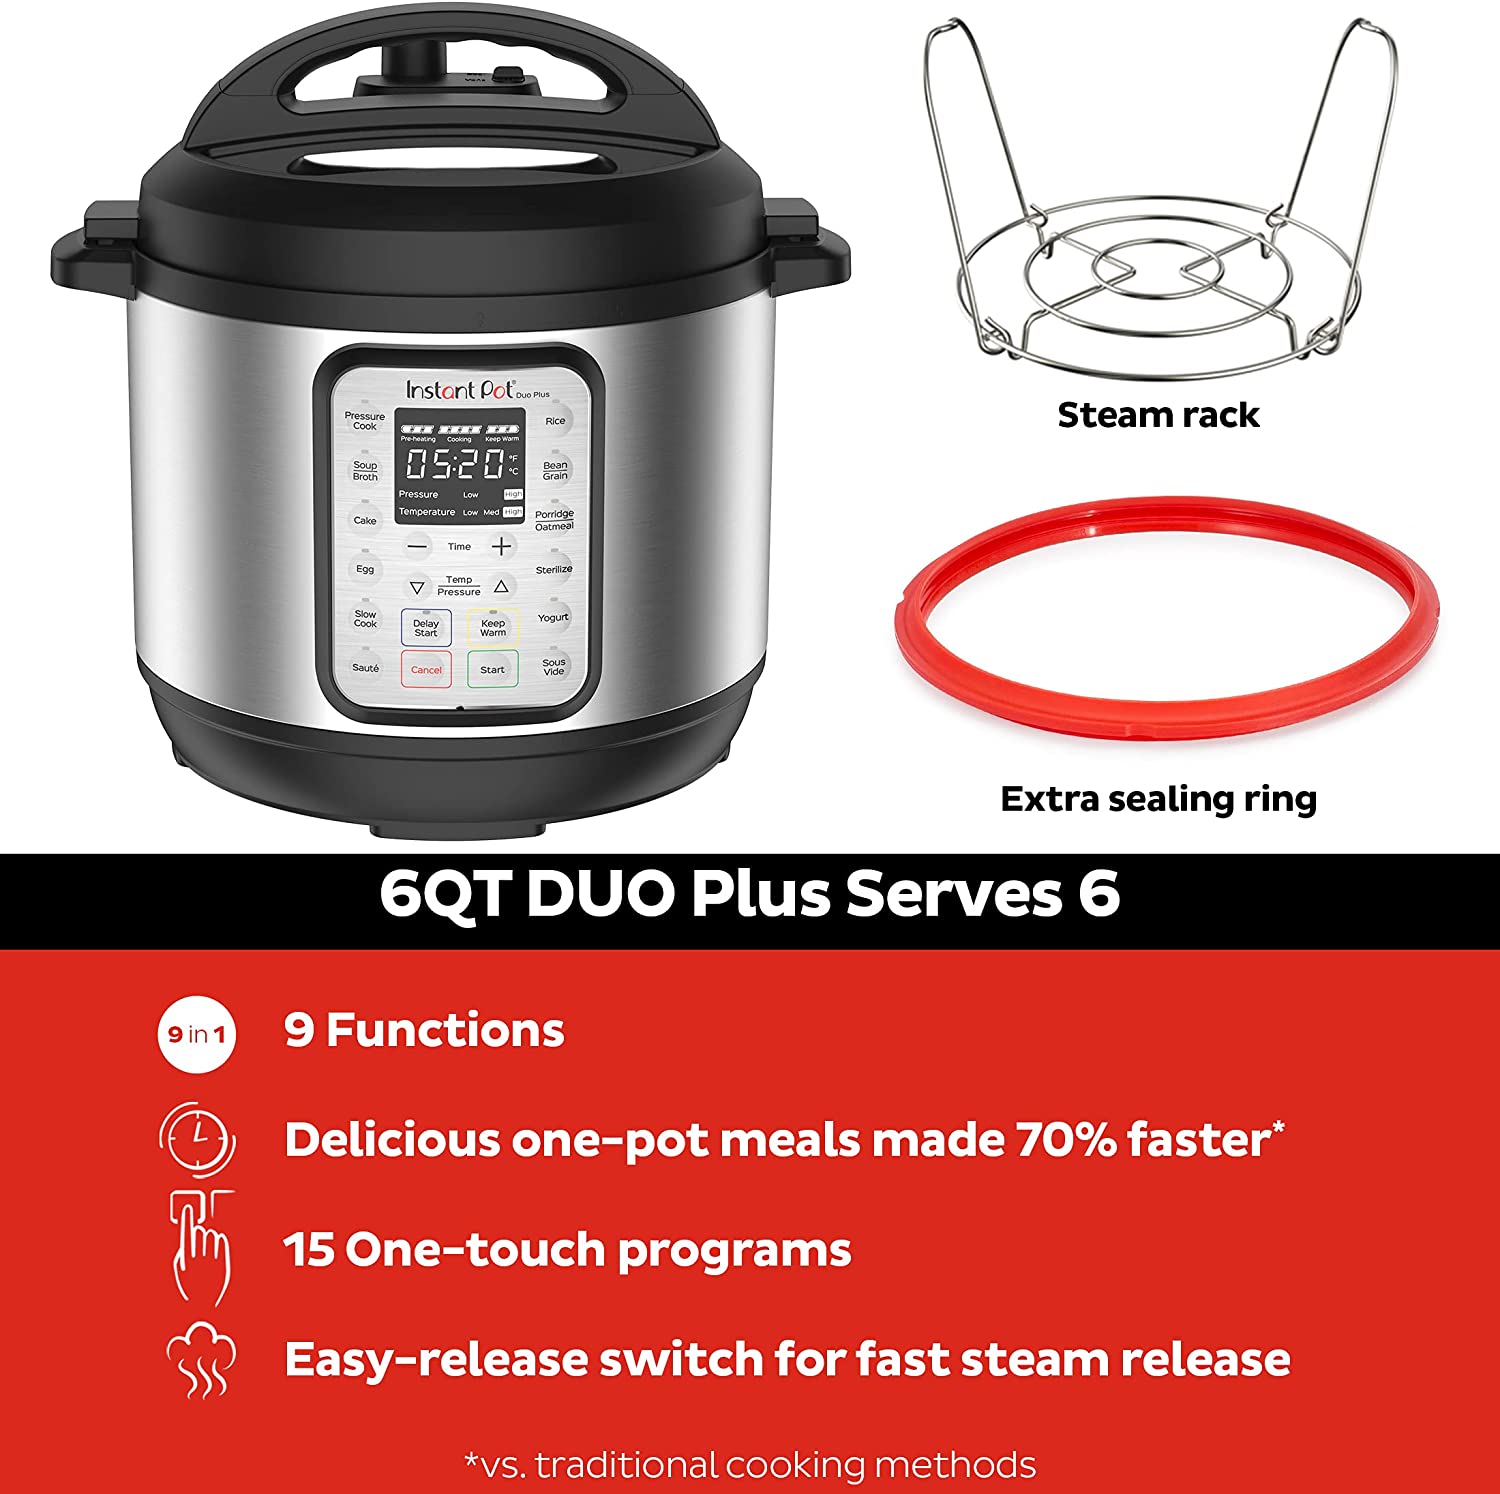 https://bigbigmart.com/wp-content/uploads/2023/06/Instant-Pot-Duo-Plus-9-in-1-Electric-Pressure-Cooker-Slow-Cooker-Rice-Cooker-Steamer-Saute-Yogurt-Maker-Warmer-Sterilizer-Includes-Free-App-with-over-1900-Recipes-Stainless-Steel-6-Quart1.jpg